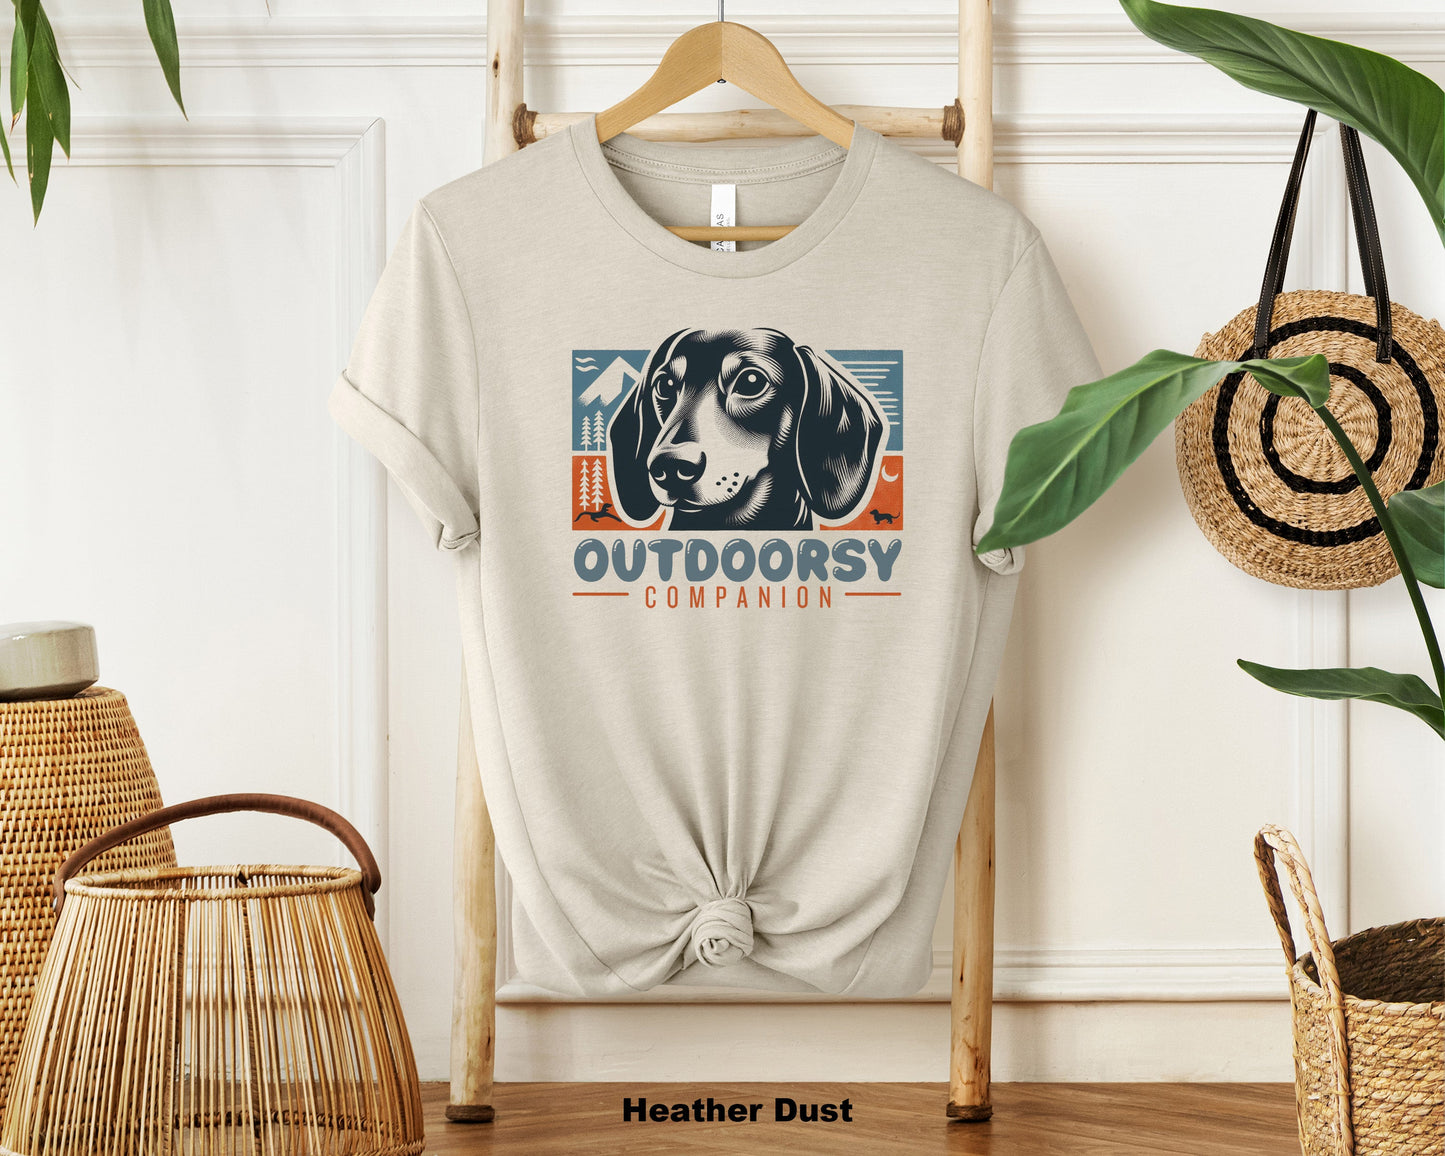 Dachshund Dog Lover Soft Cotton Crewneck T-Shirt with Cute Outdoorsy Print